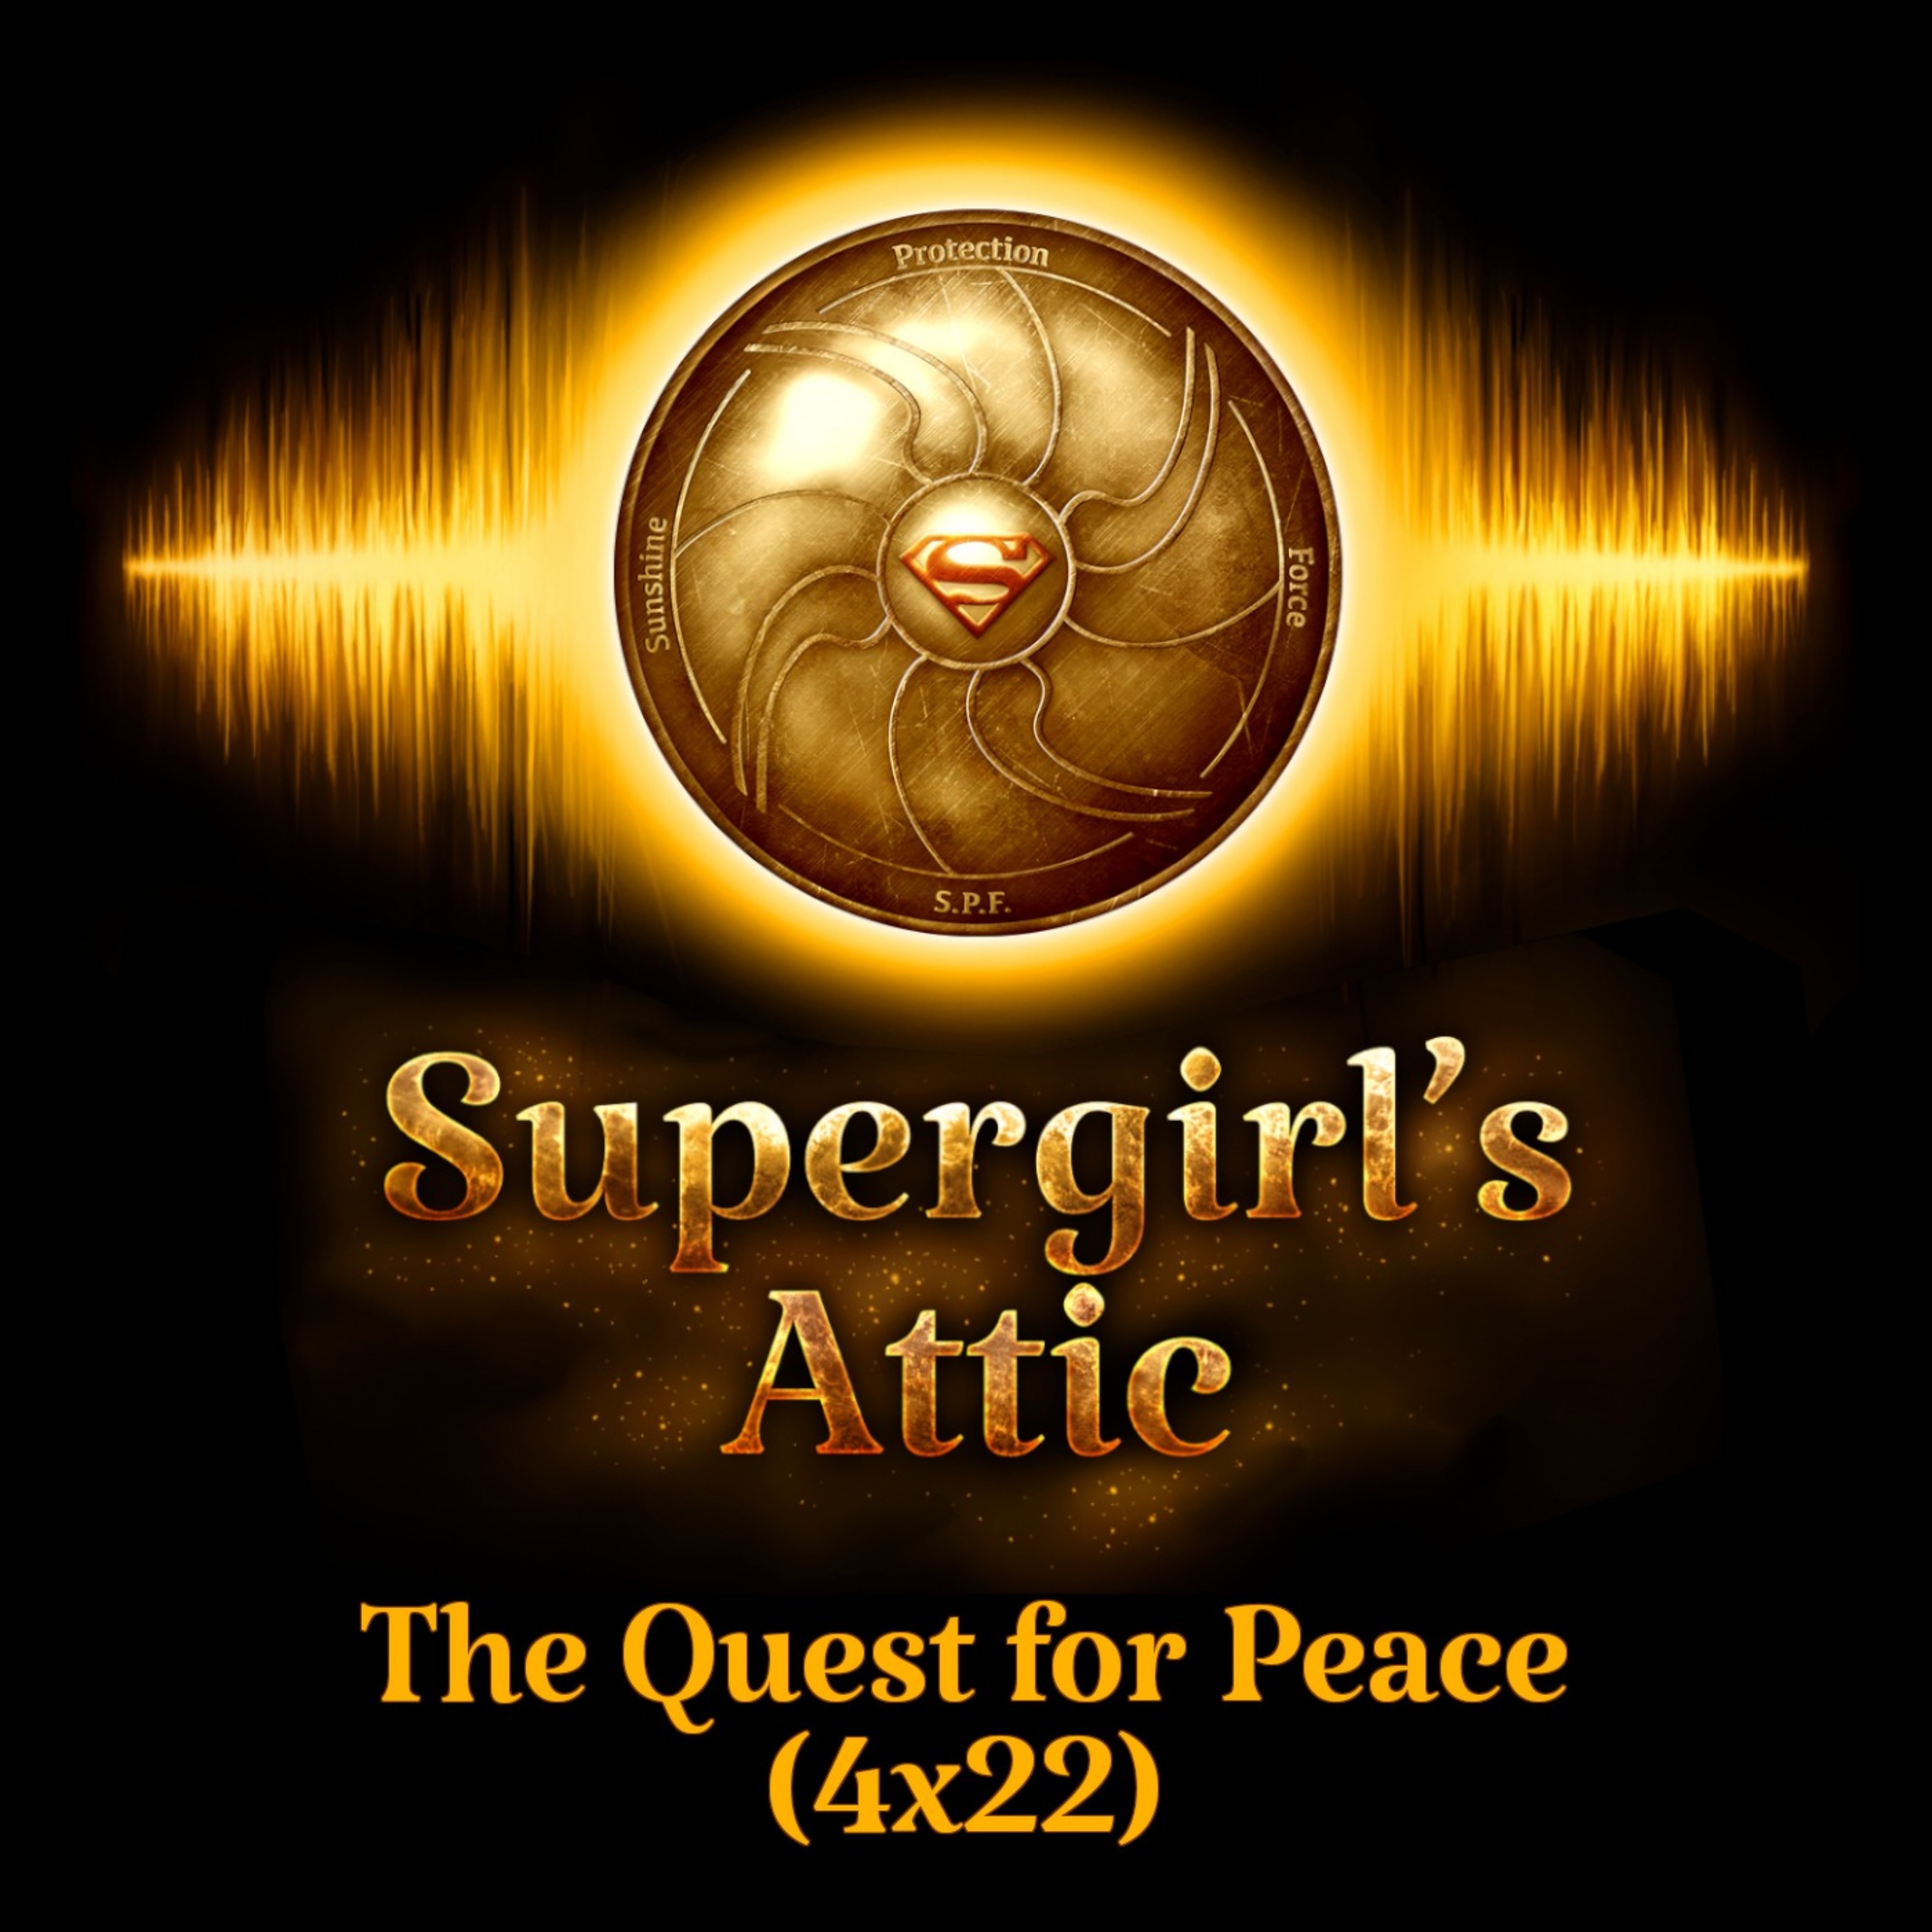 The Quest for Peace (4x22)